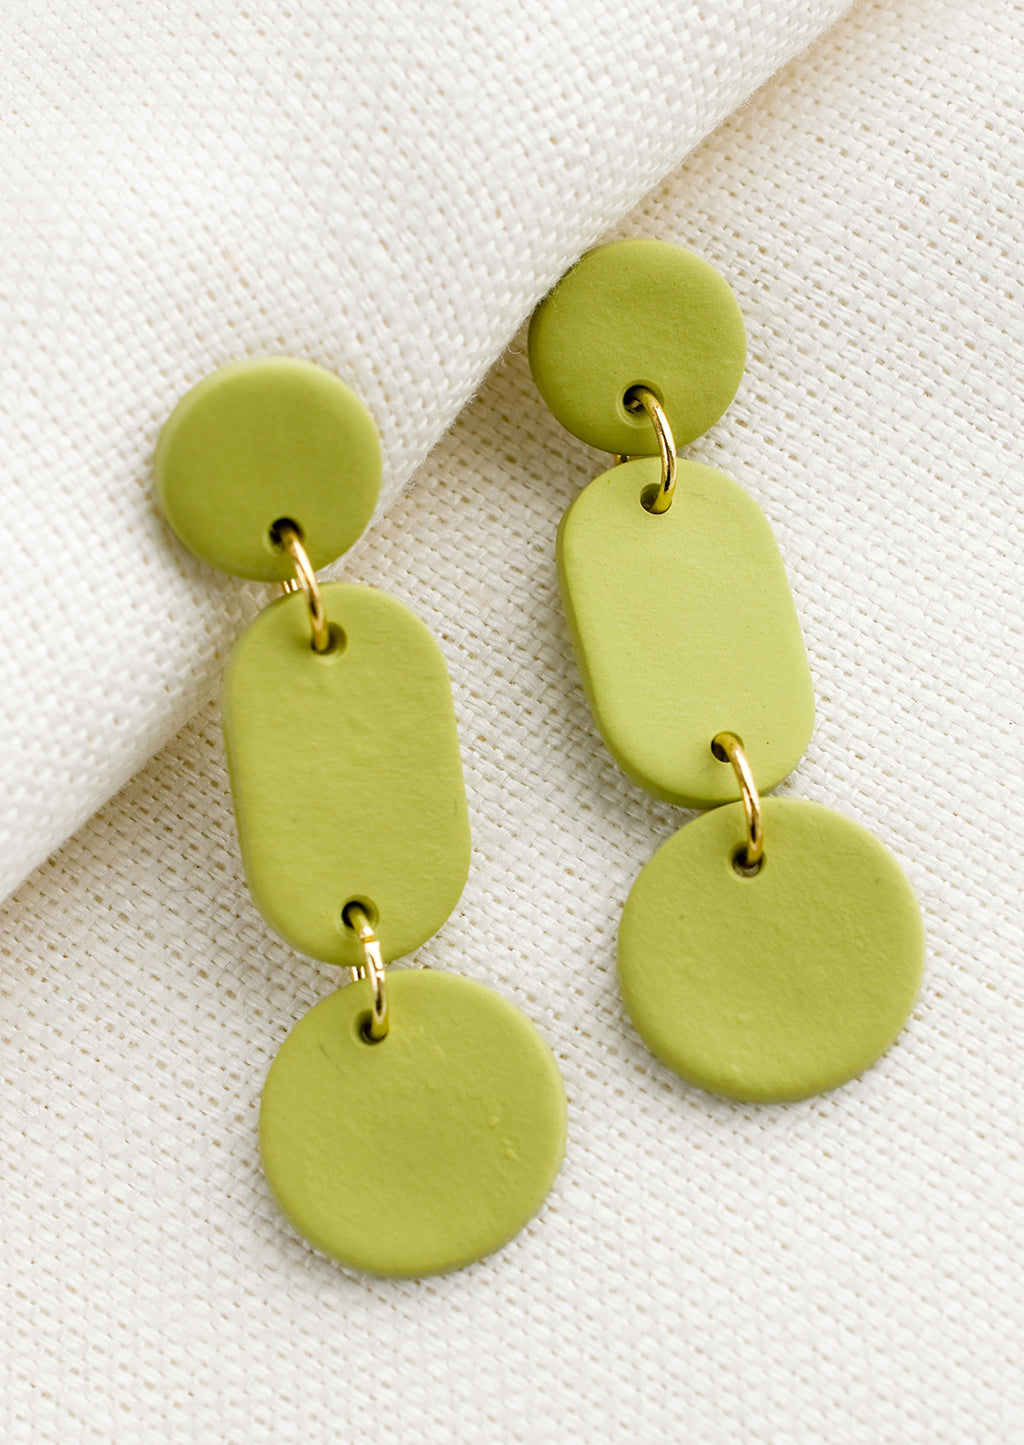 Green Apple: A pair of earrings in three part geometric design in green.